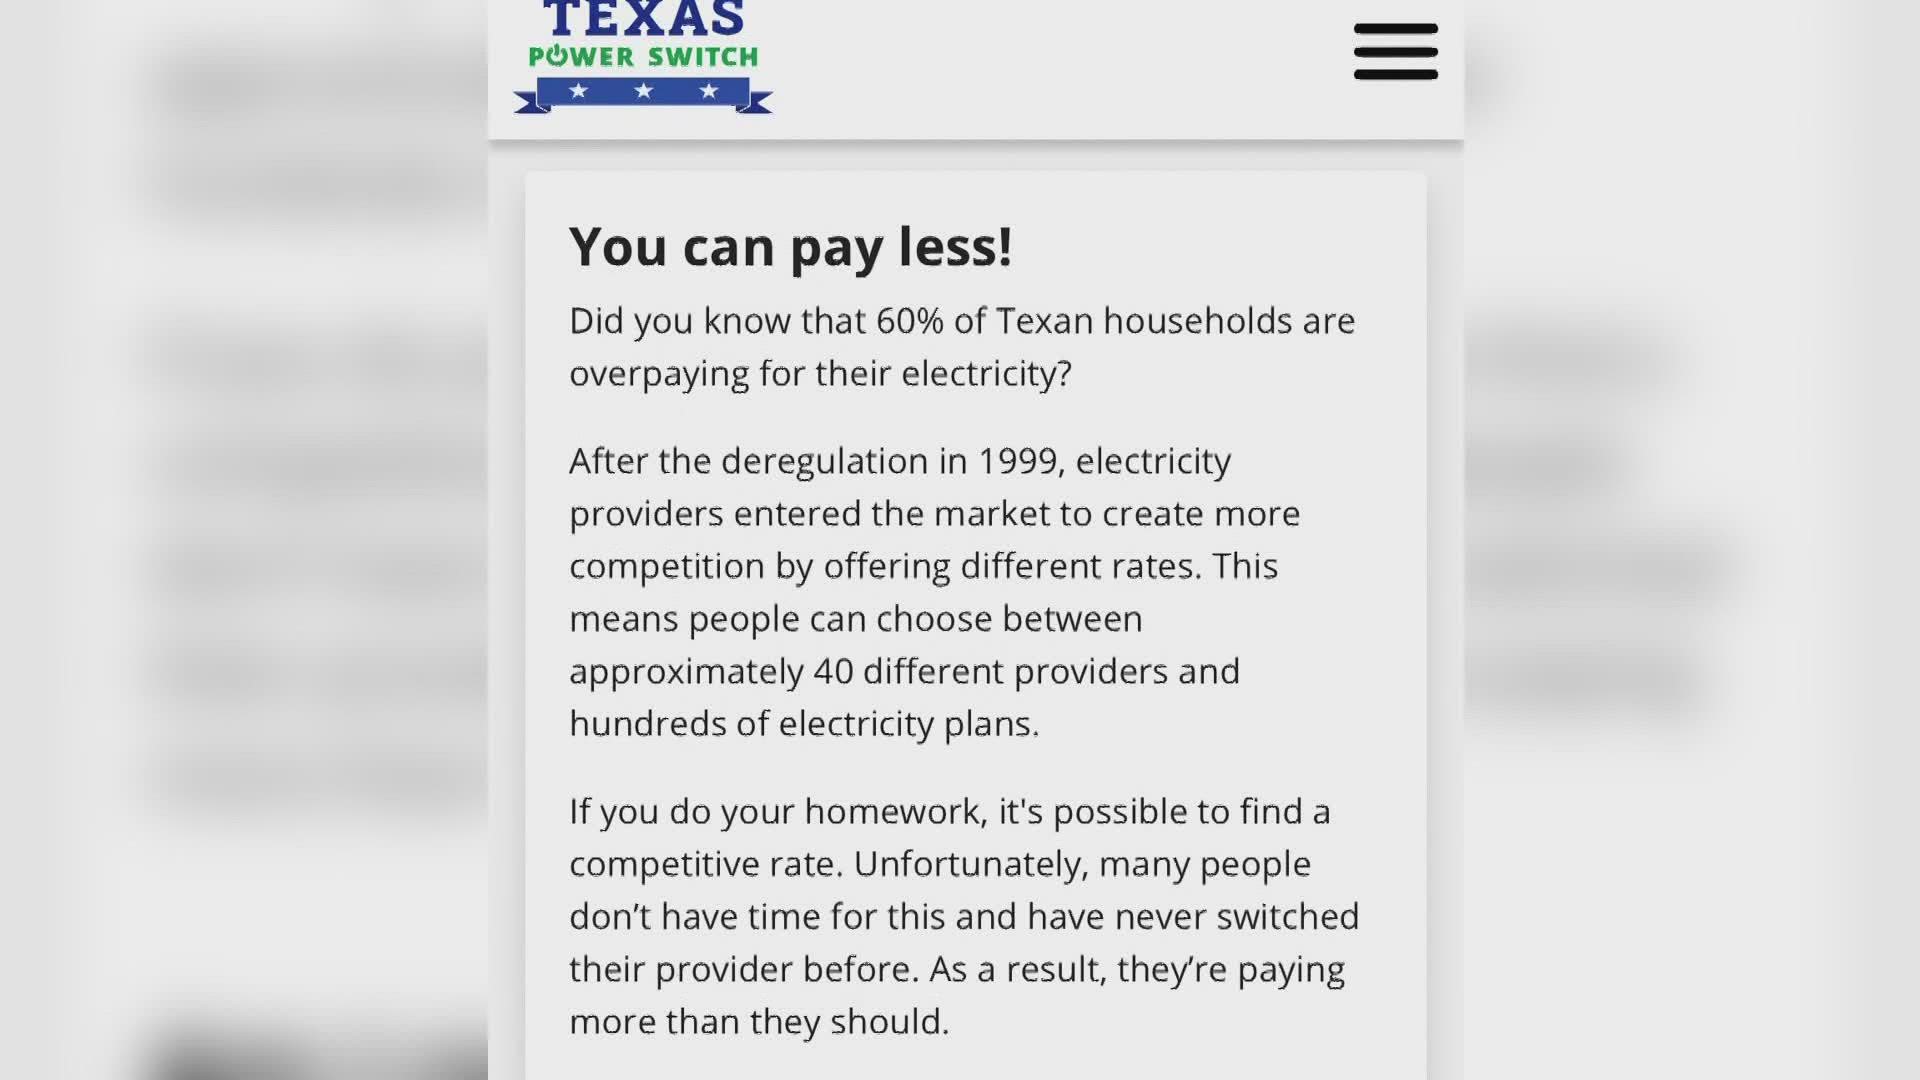 The company offers competitive electricity rates and promises big savings.